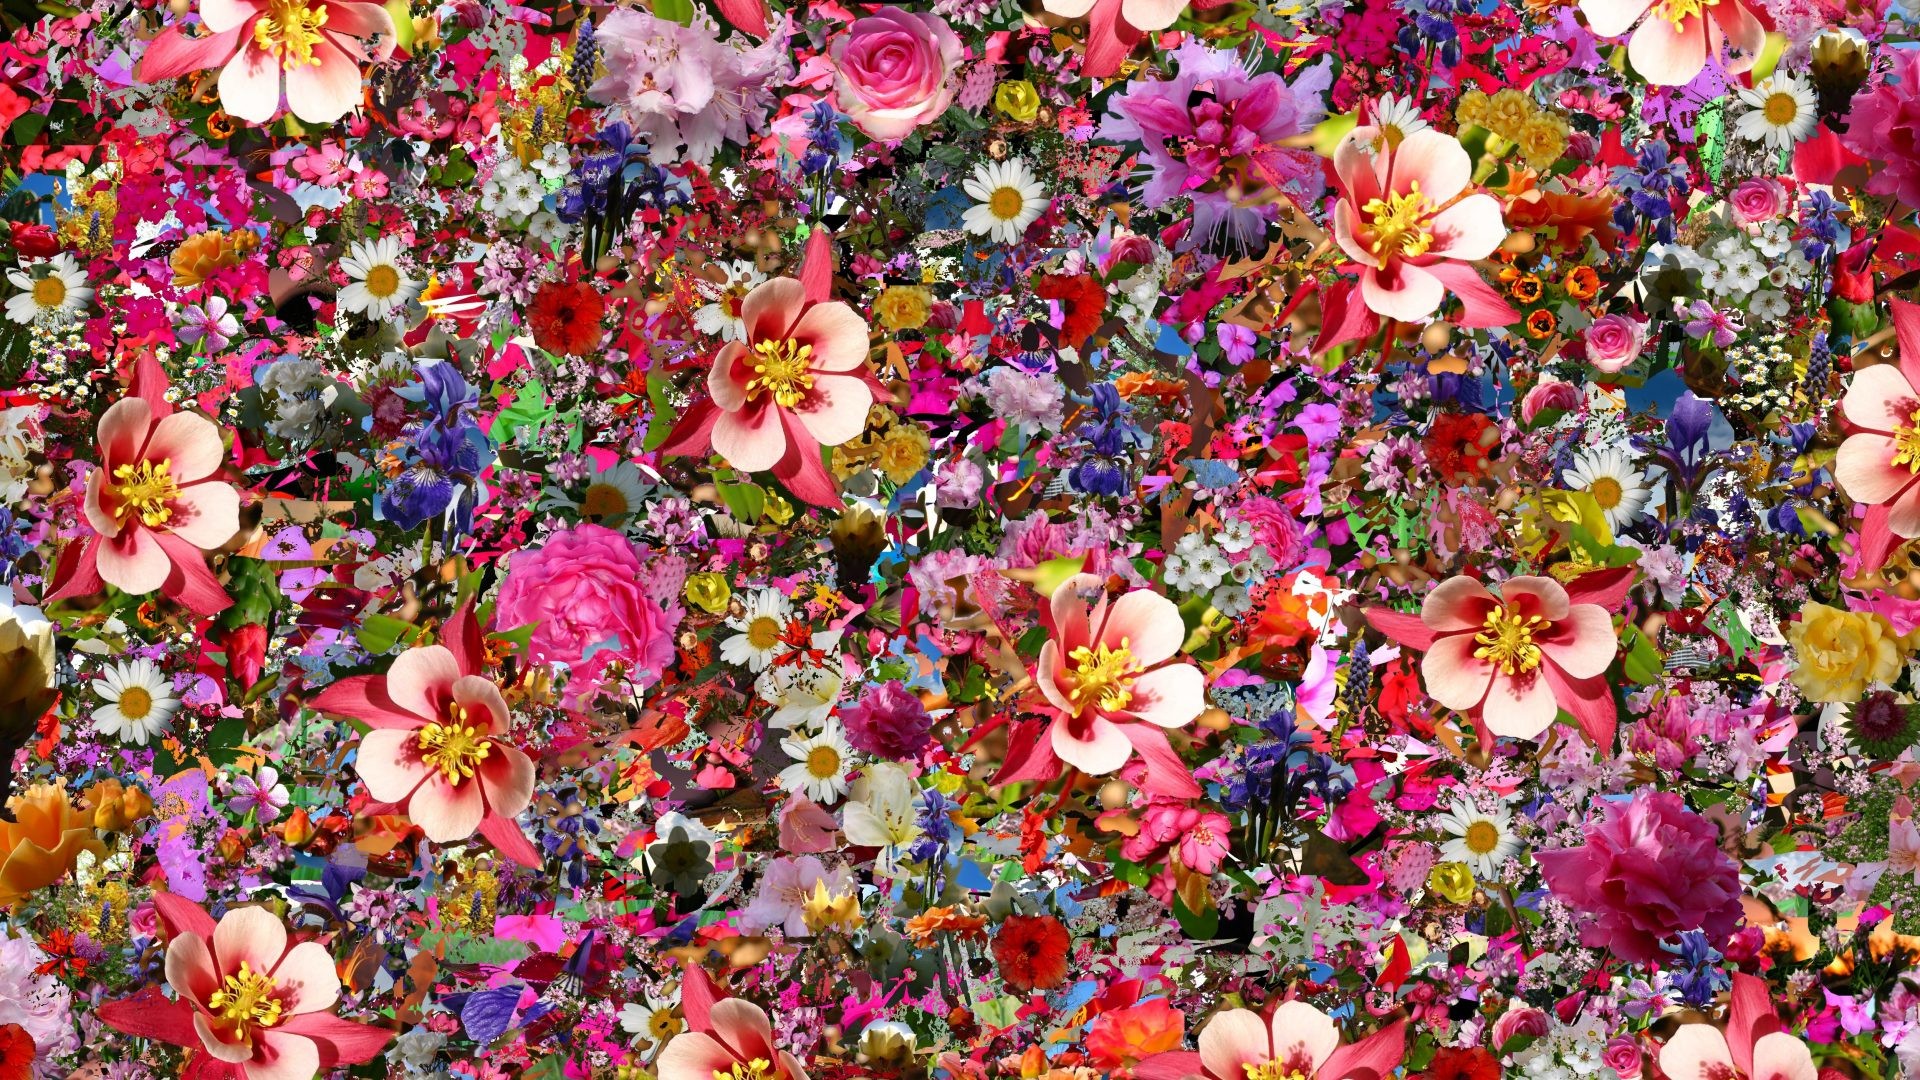 1920x1080 Psychedelic Tag - Flower Psychedelic Nature Image High Quality for HD 16:9 High  Definition